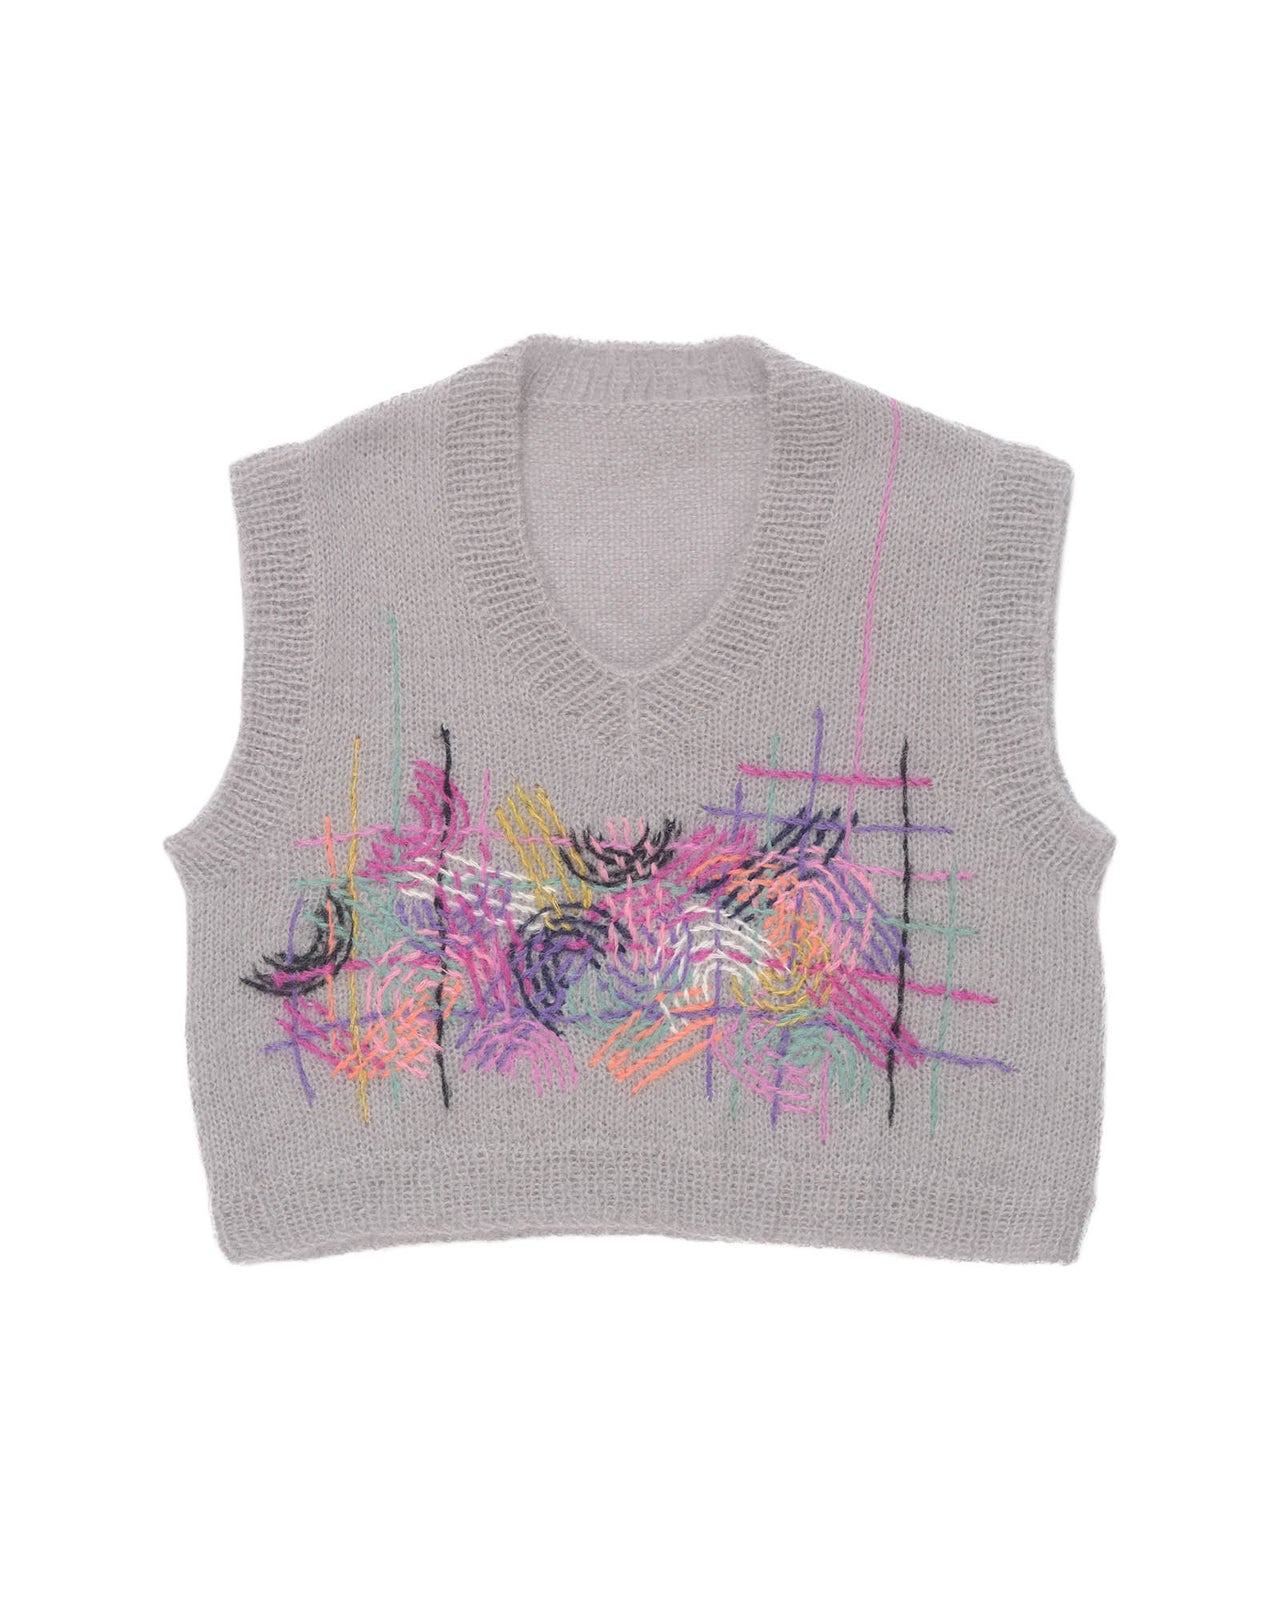 Grey mohair vest laid flat on white background. The vest is adorned with colourful embroidered abstract motifs in its center. 